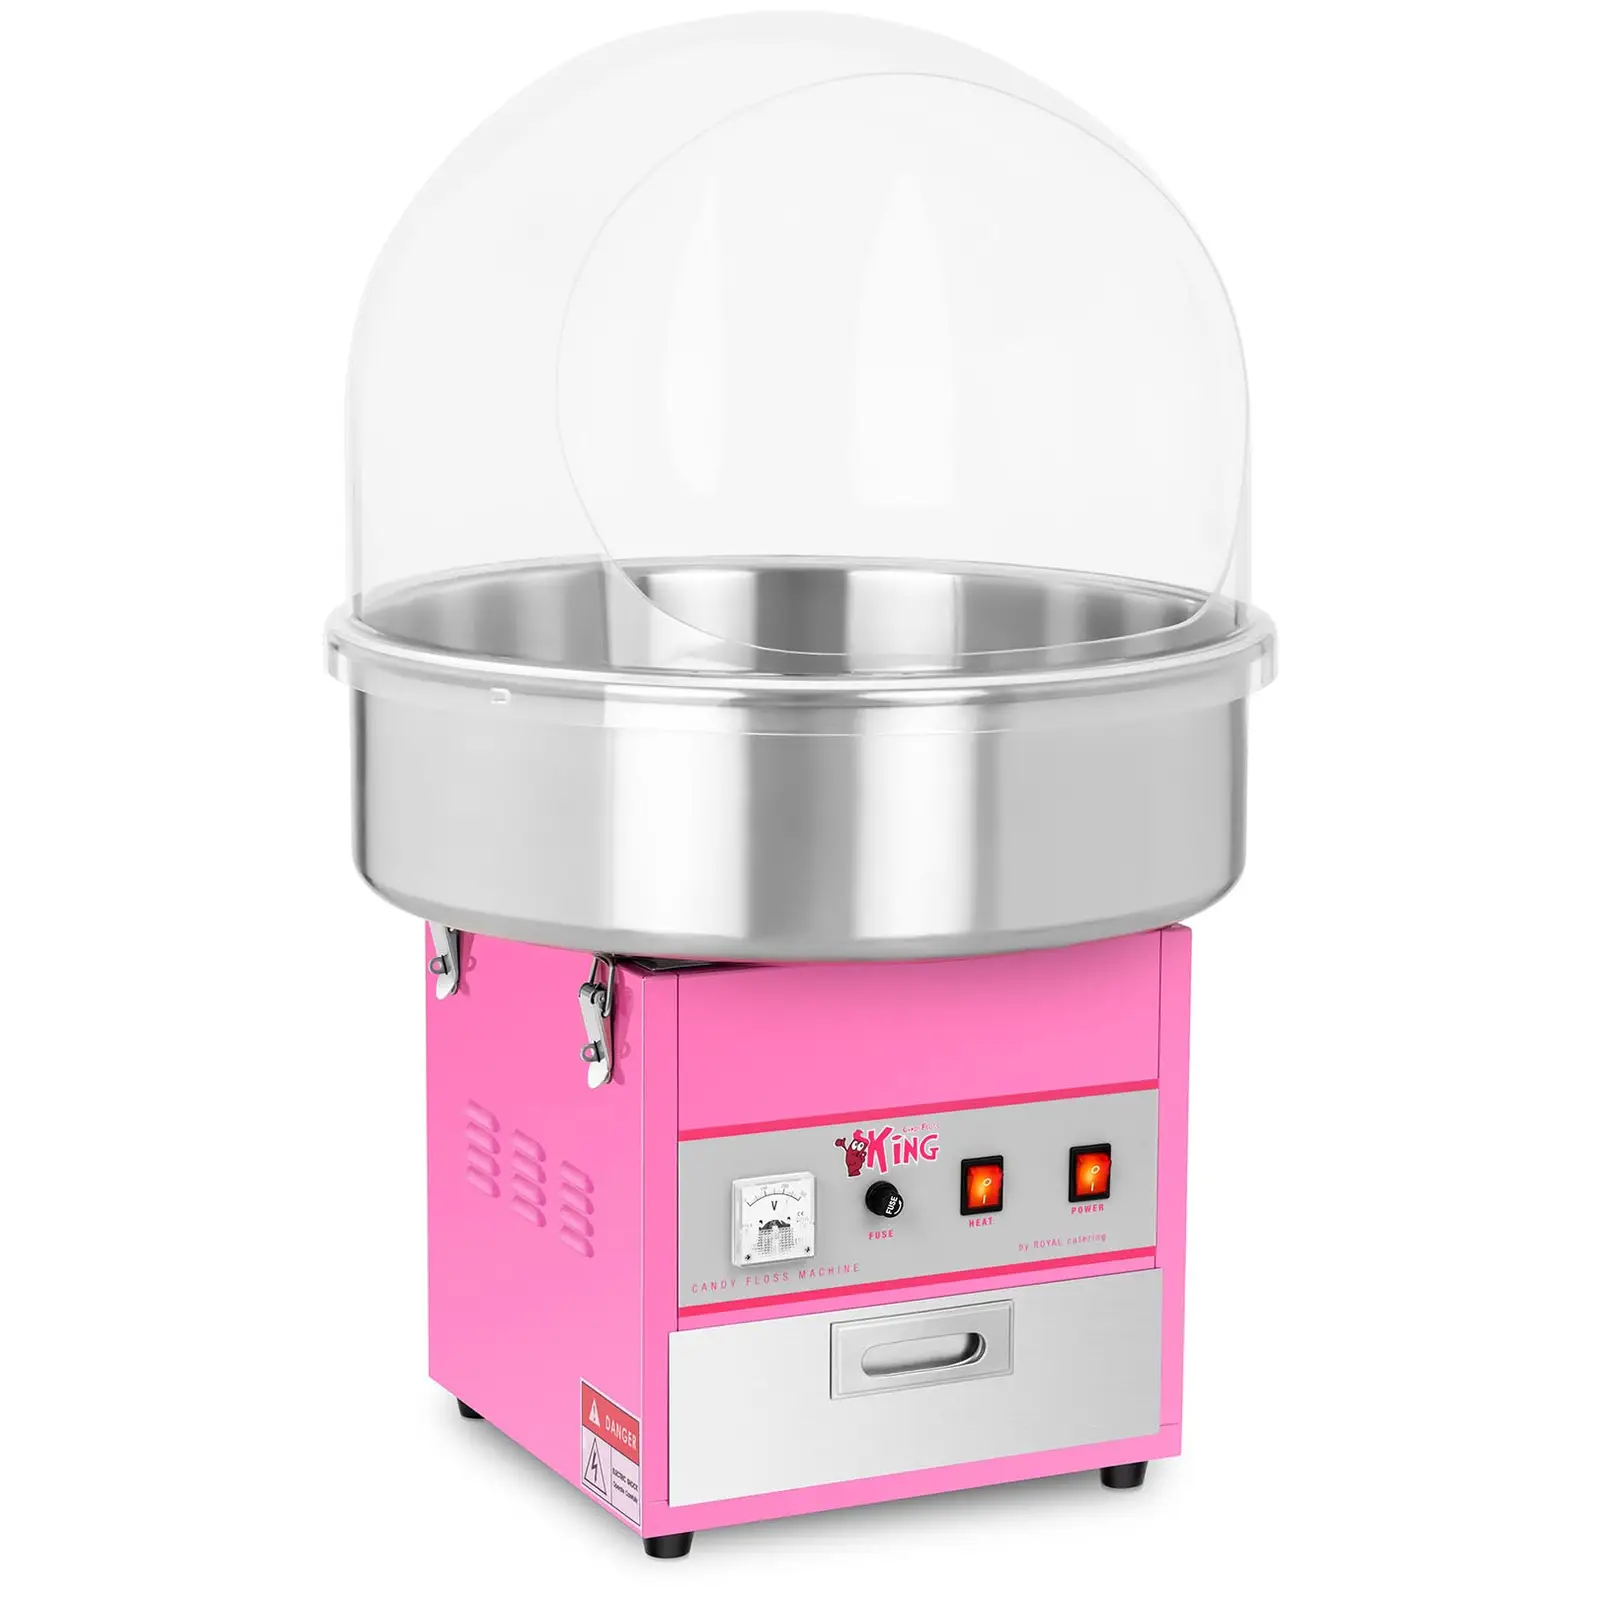 Commercial Candy Floss Machine - 52 cm - 1200 W - Spit Protection